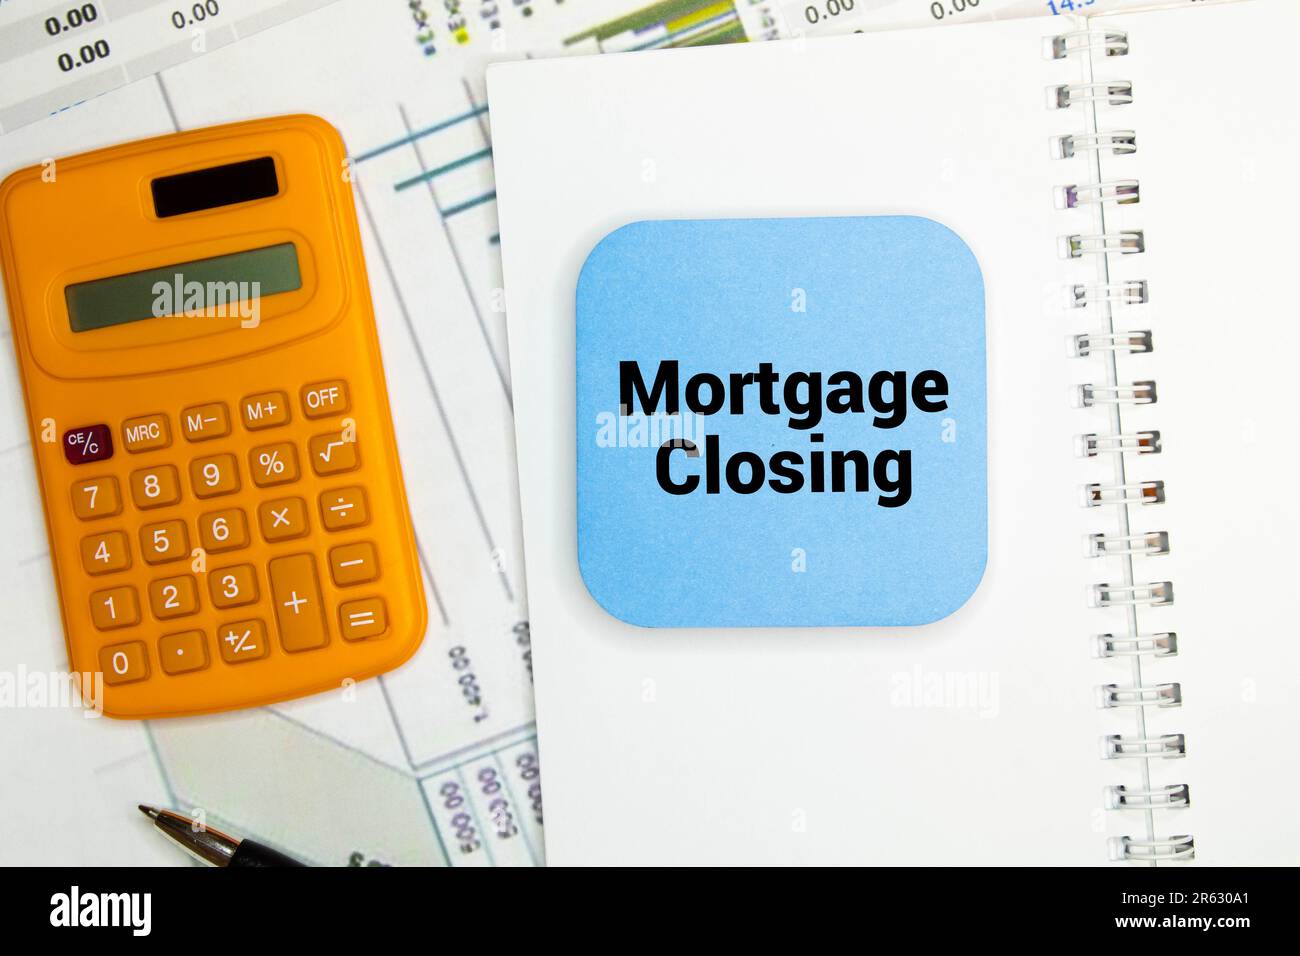 Mortgage Closing is shown using a text. Stock Photo